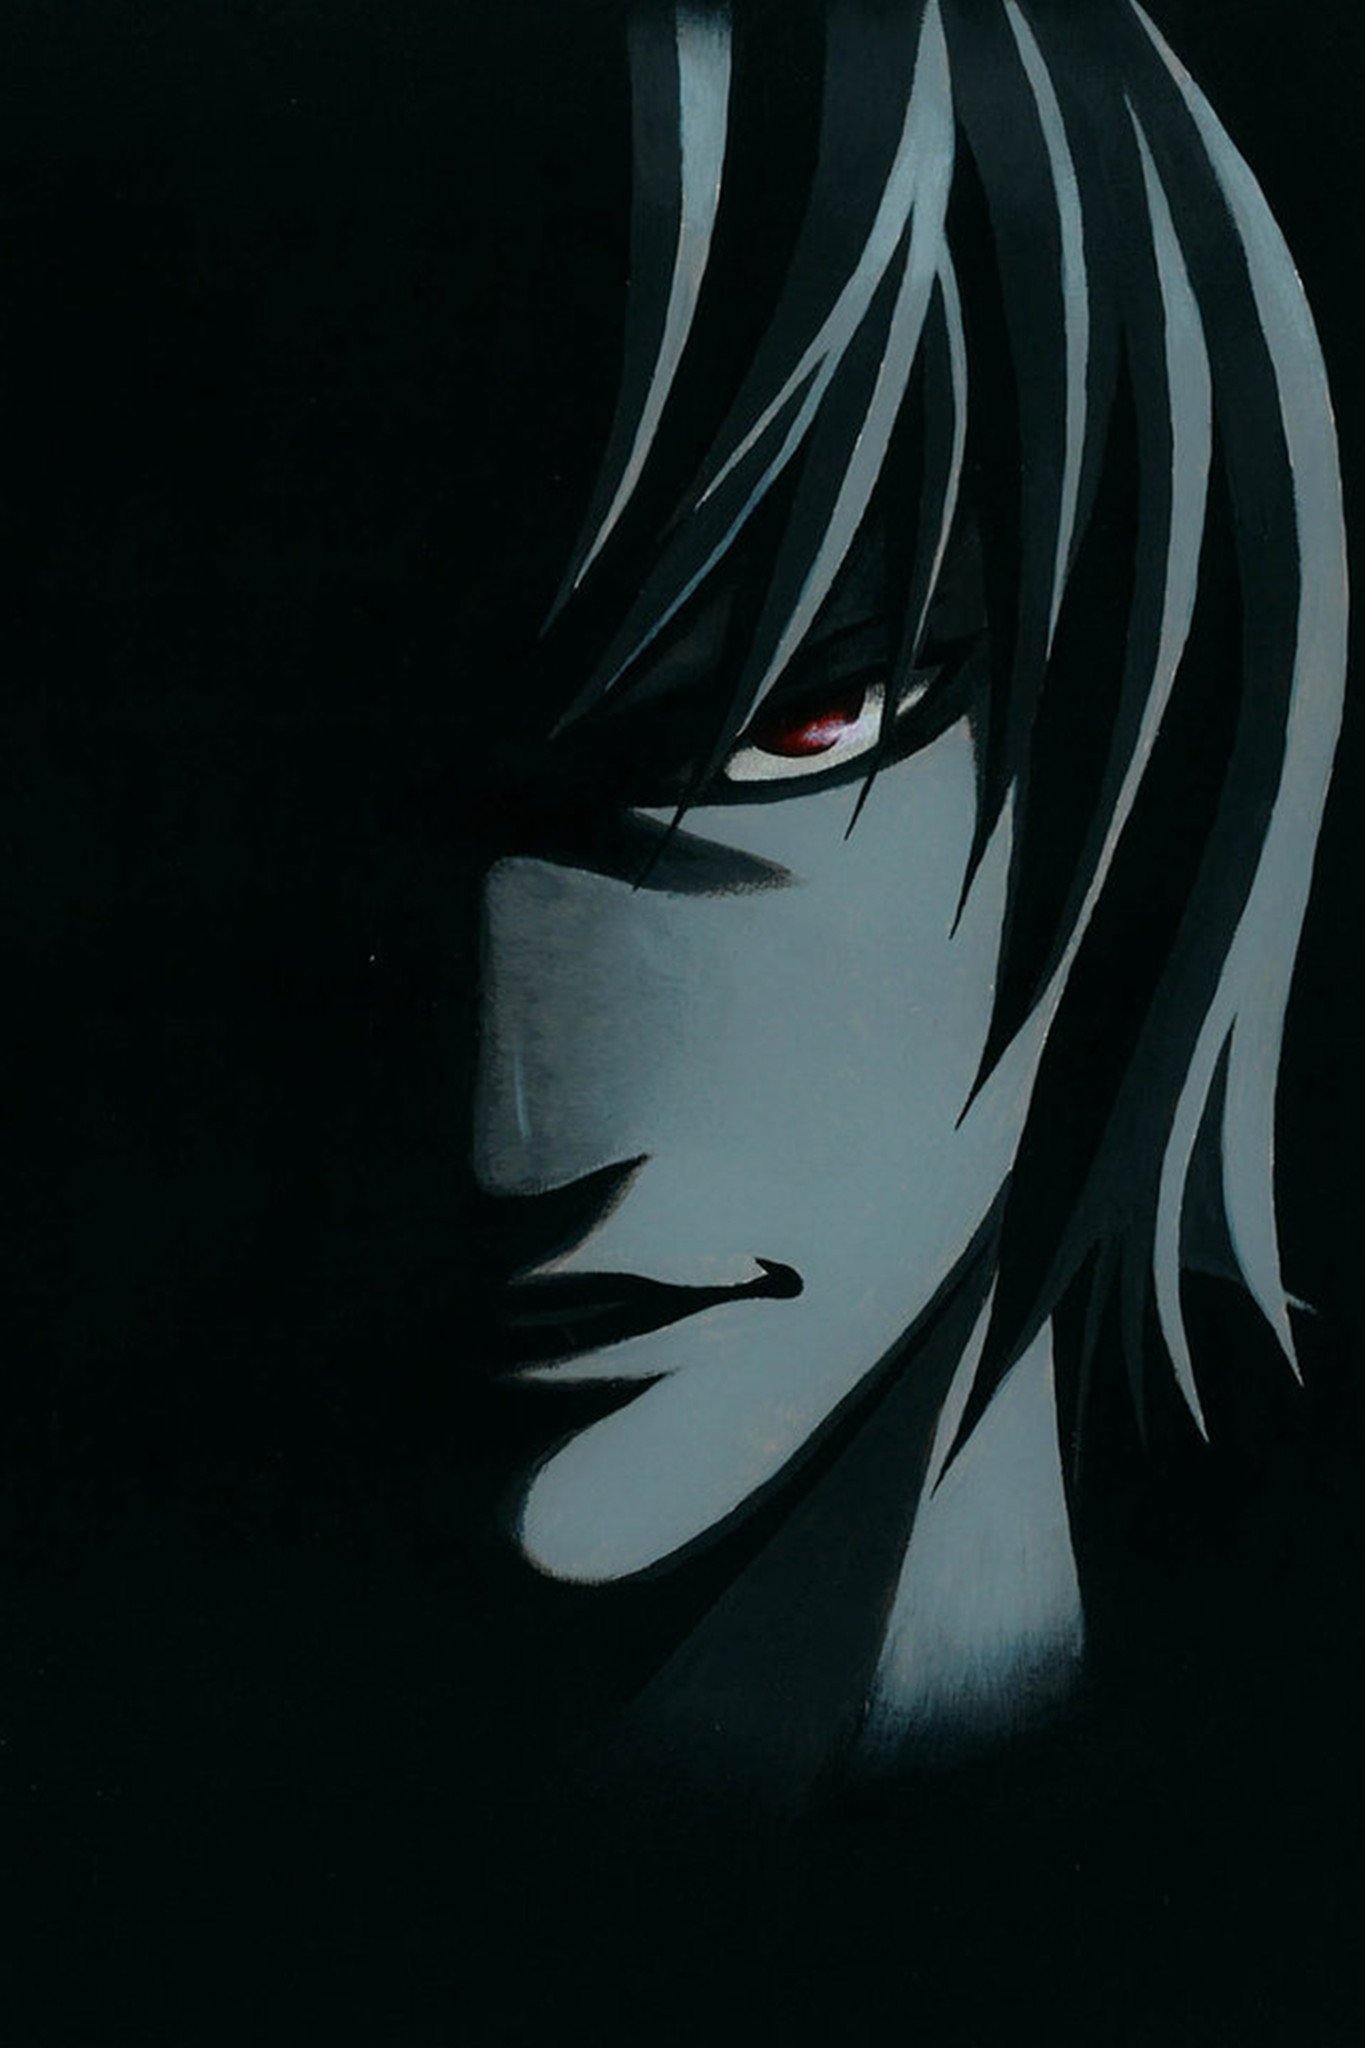 Anime Light Yagami from Death Note poster in India - Silly Punter